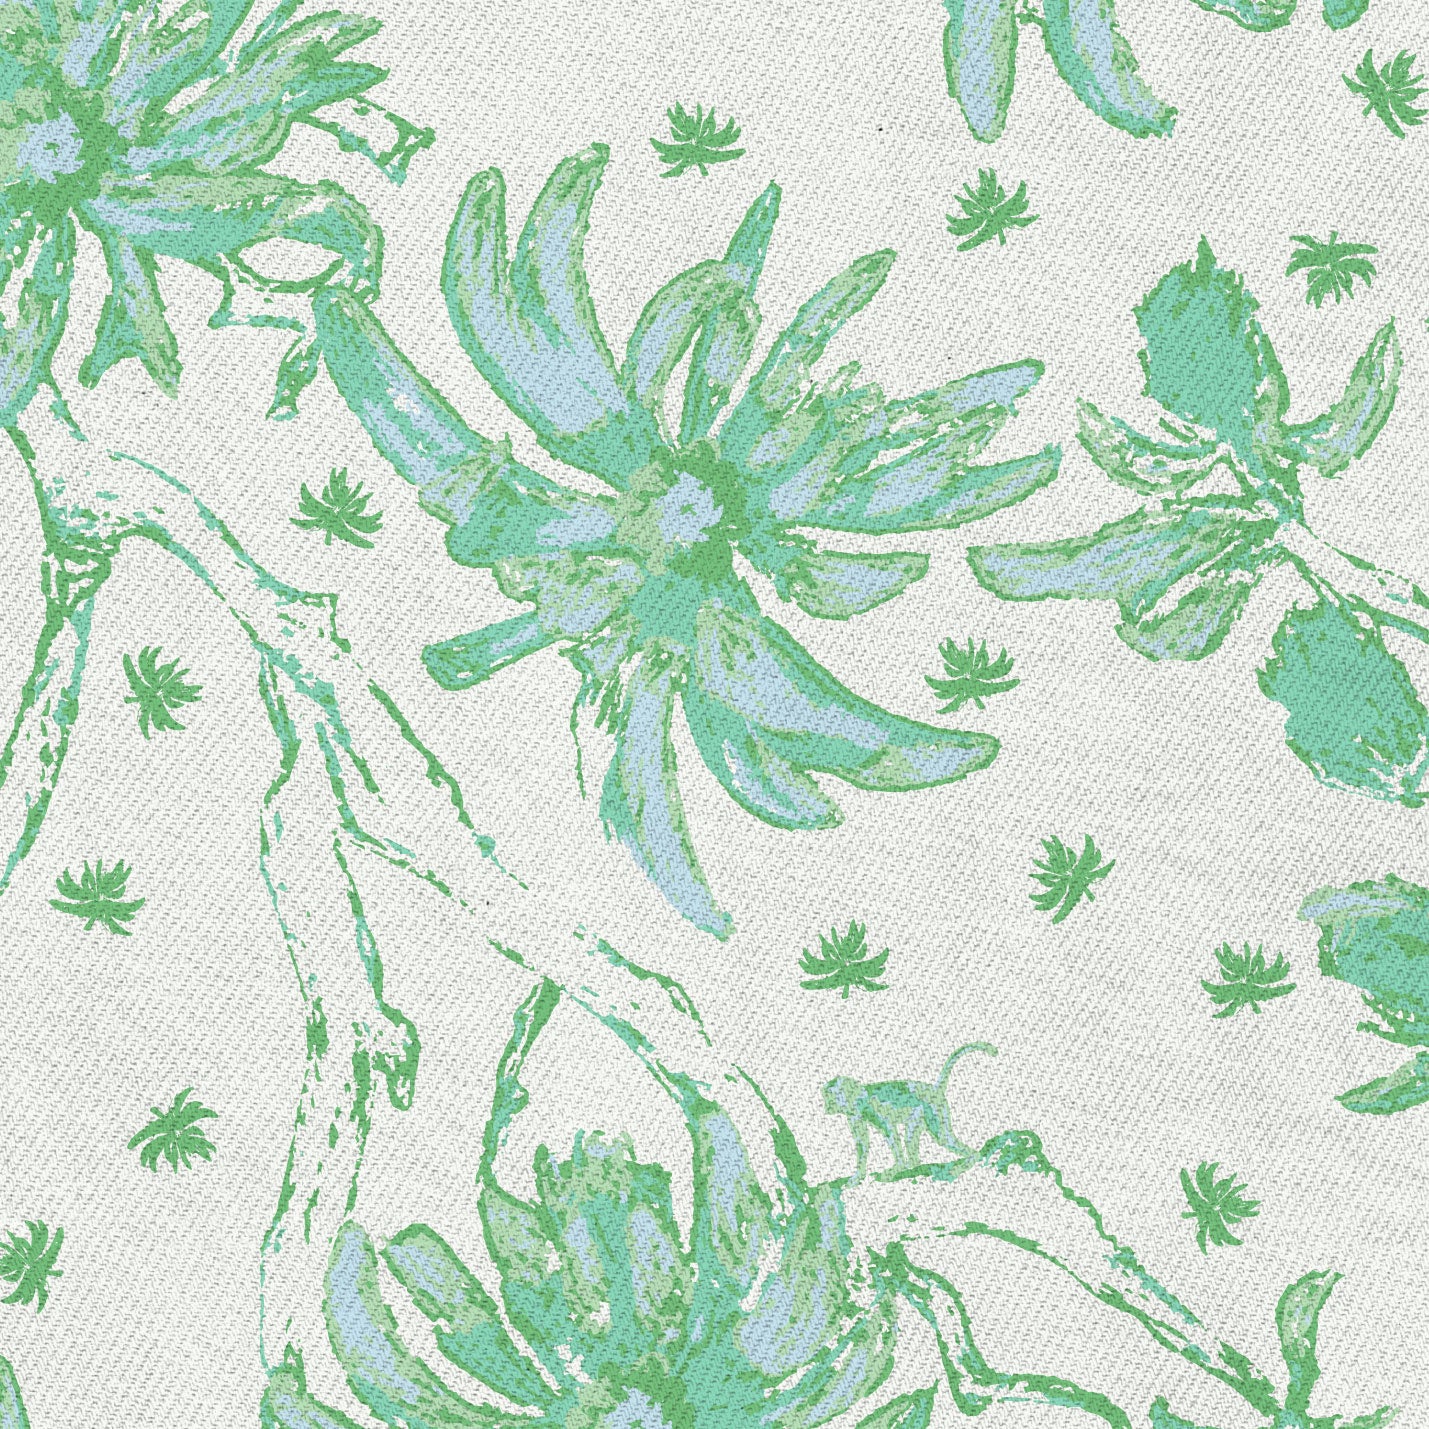 flowers Natural Textured Eco-Friendly Non-toxic High-quality Sustainable practices Sustainability Luxury Contemporary Designer Custom interior Bespoke Tailor-made Nature inspired Bold Garden Wallpaper Chinoiserie Asian inspired chinz tree branches flowers flower floral garden monkey animal chinese asian inspired fabric upholstery cotton twill french blue sky soft pale dusty bright kelly green white